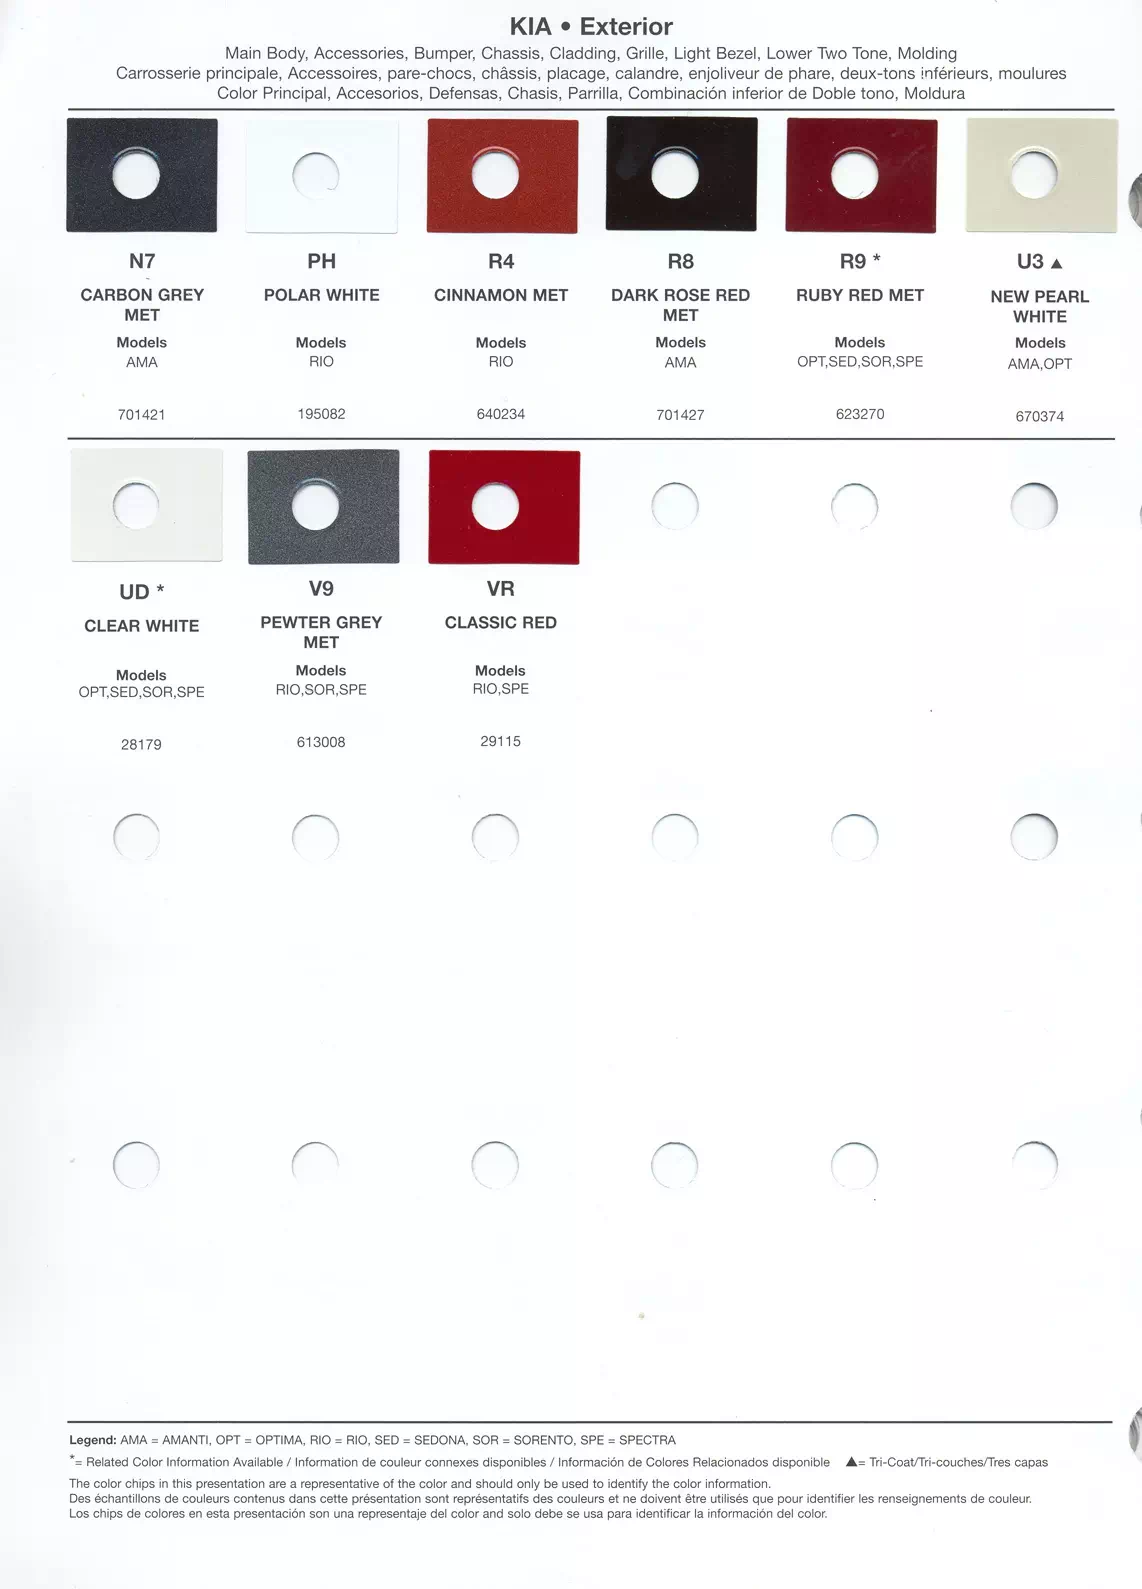 Exterior Paint Colors for Kia Vehicles in 2004